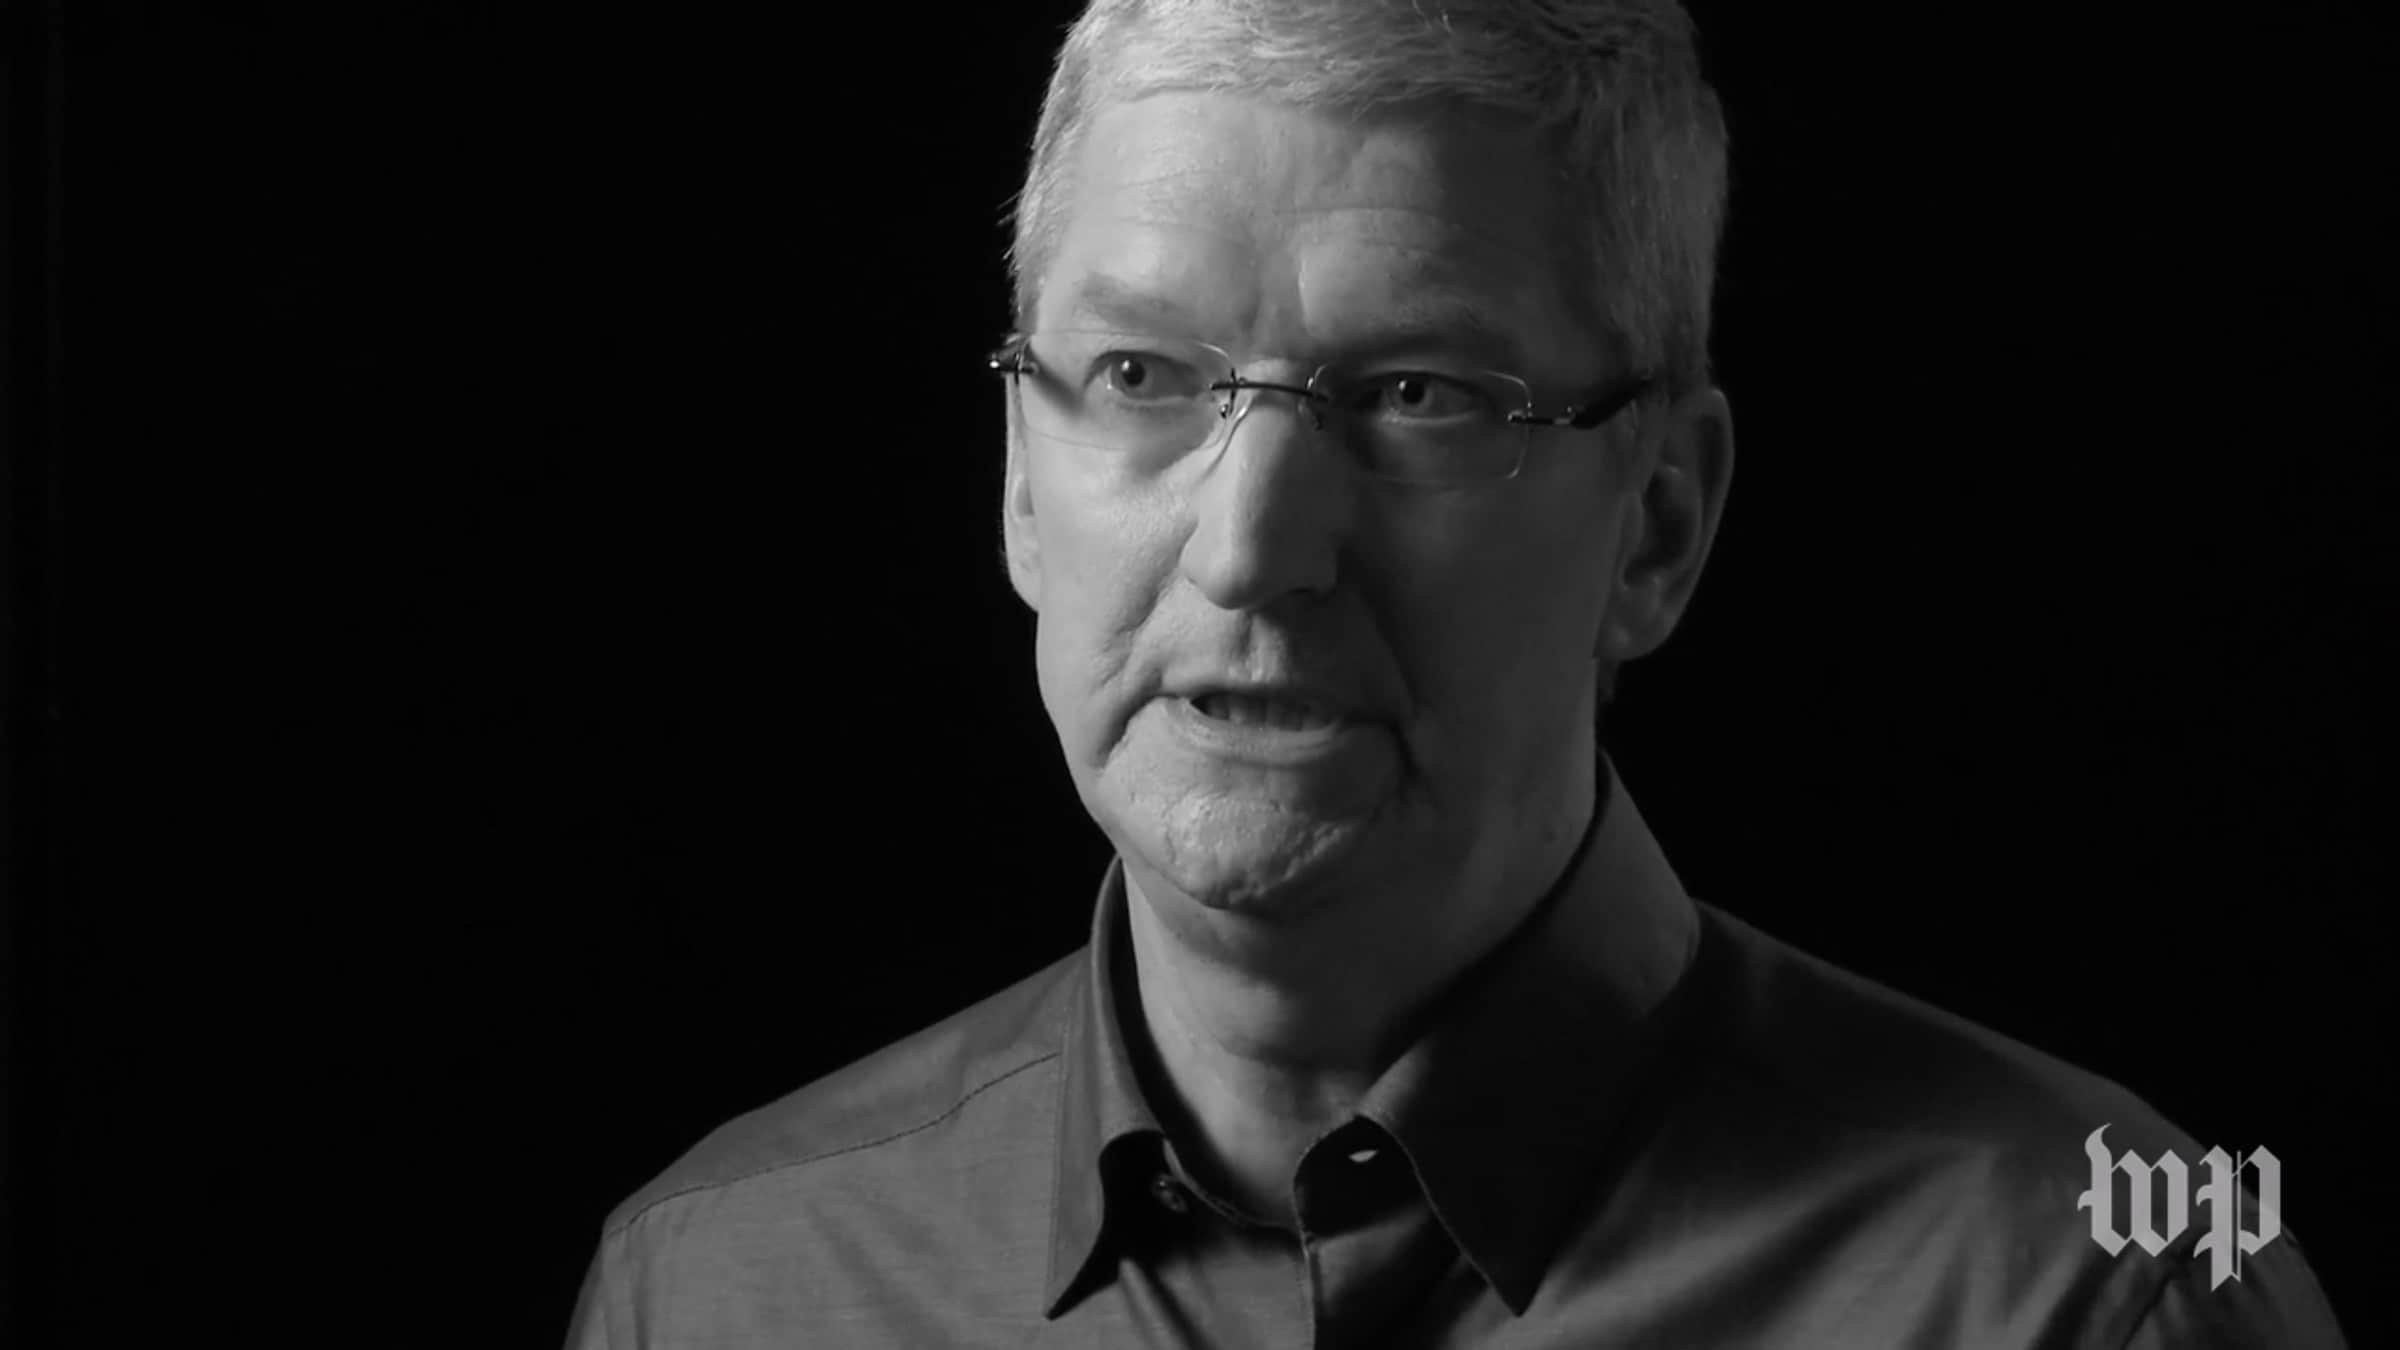 Apple CEO Tim Cook Says Trump’s Muslim Ban ‘Is Not a Policy We Support’